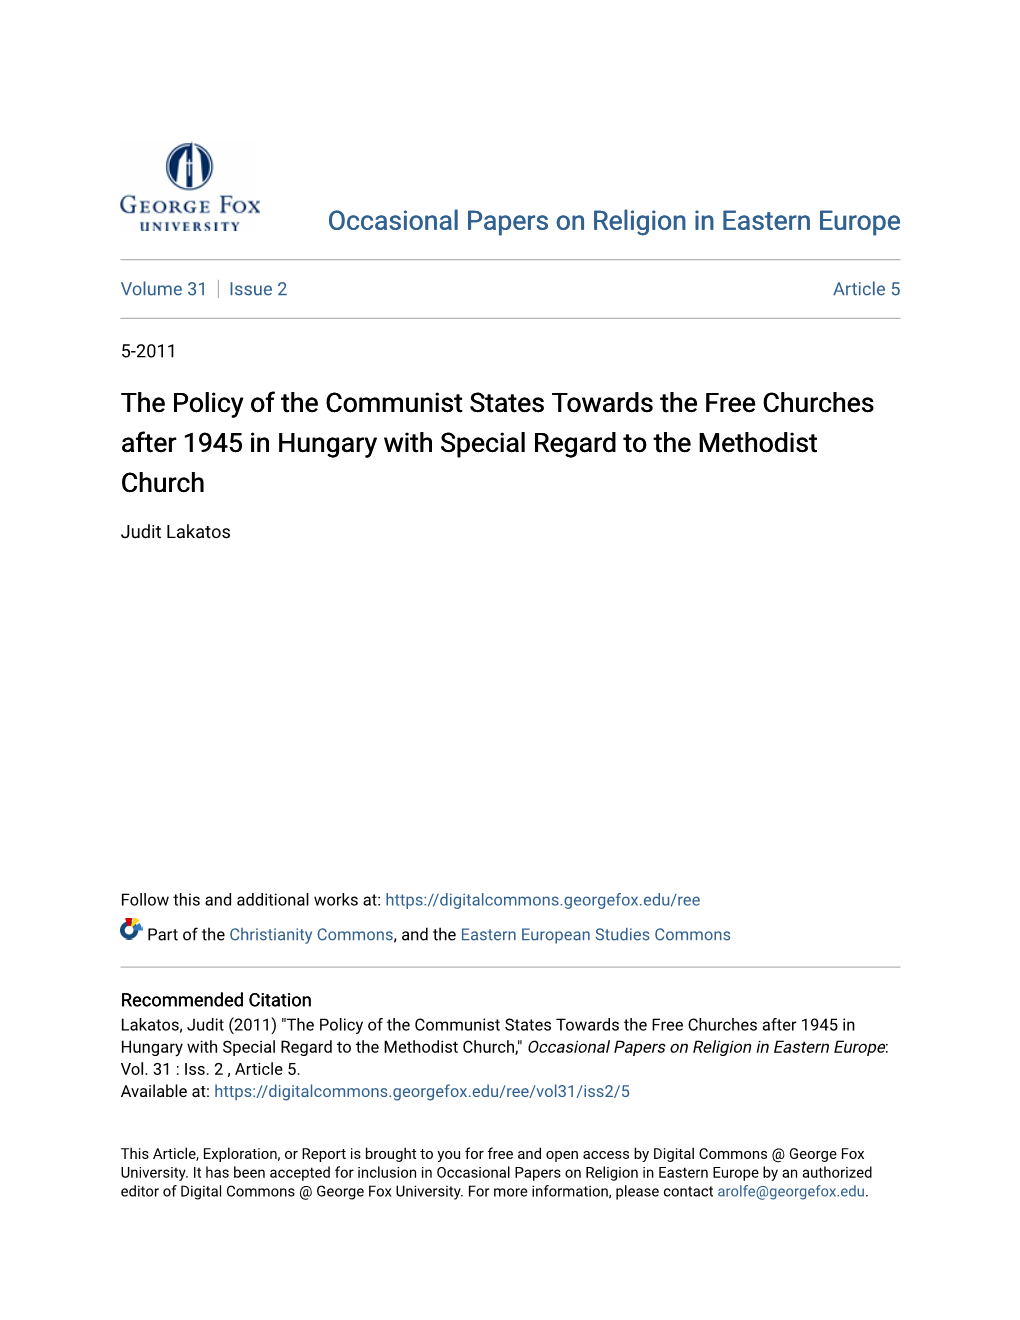 The Policy of the Communist States Towards the Free Churches After 1945 in Hungary with Special Regard to the Methodist Church